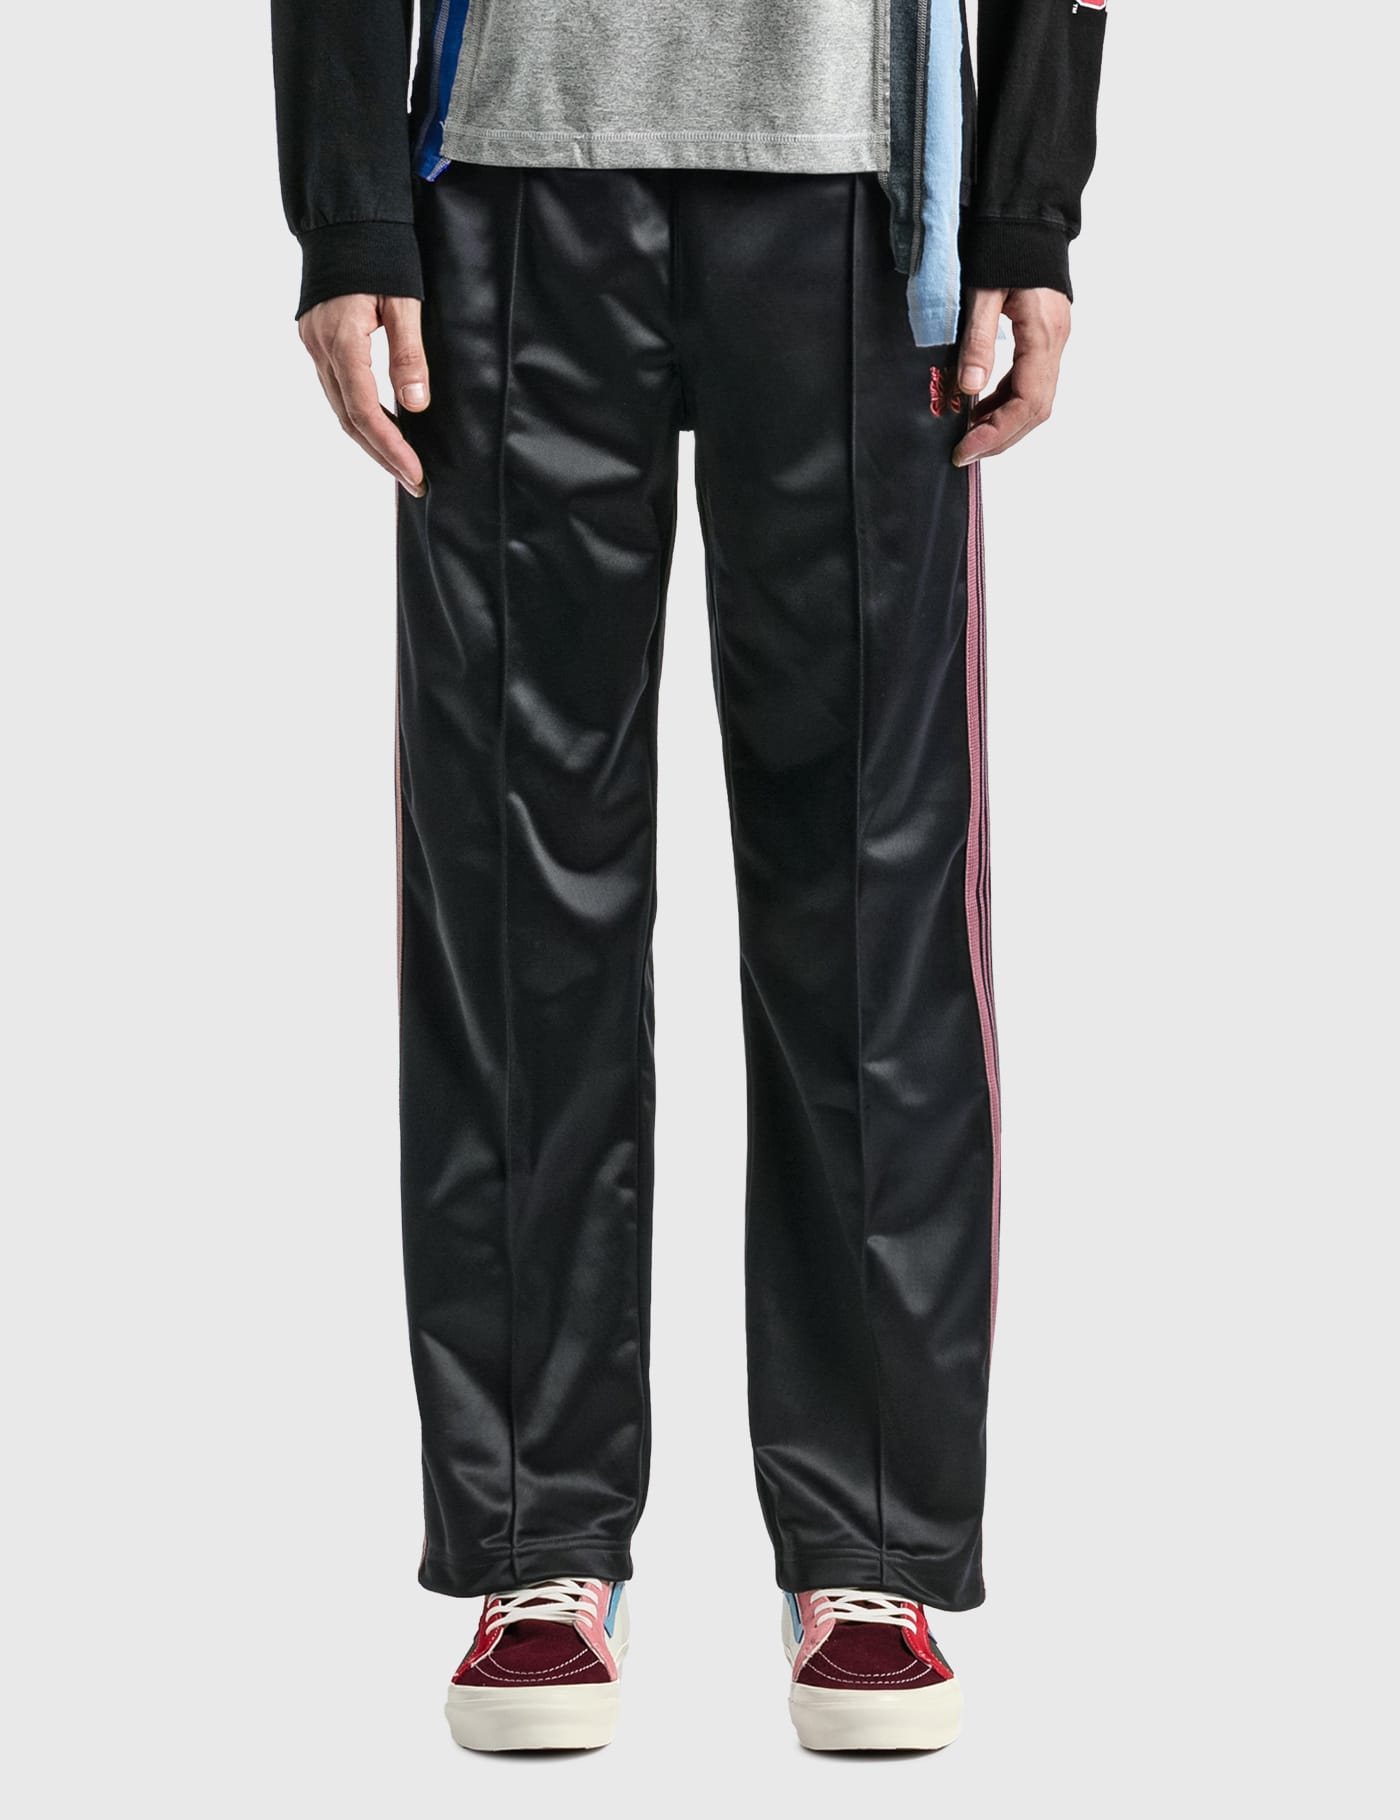 Needles - Tricot Track Pants | HBX - Globally Curated Fashion and 